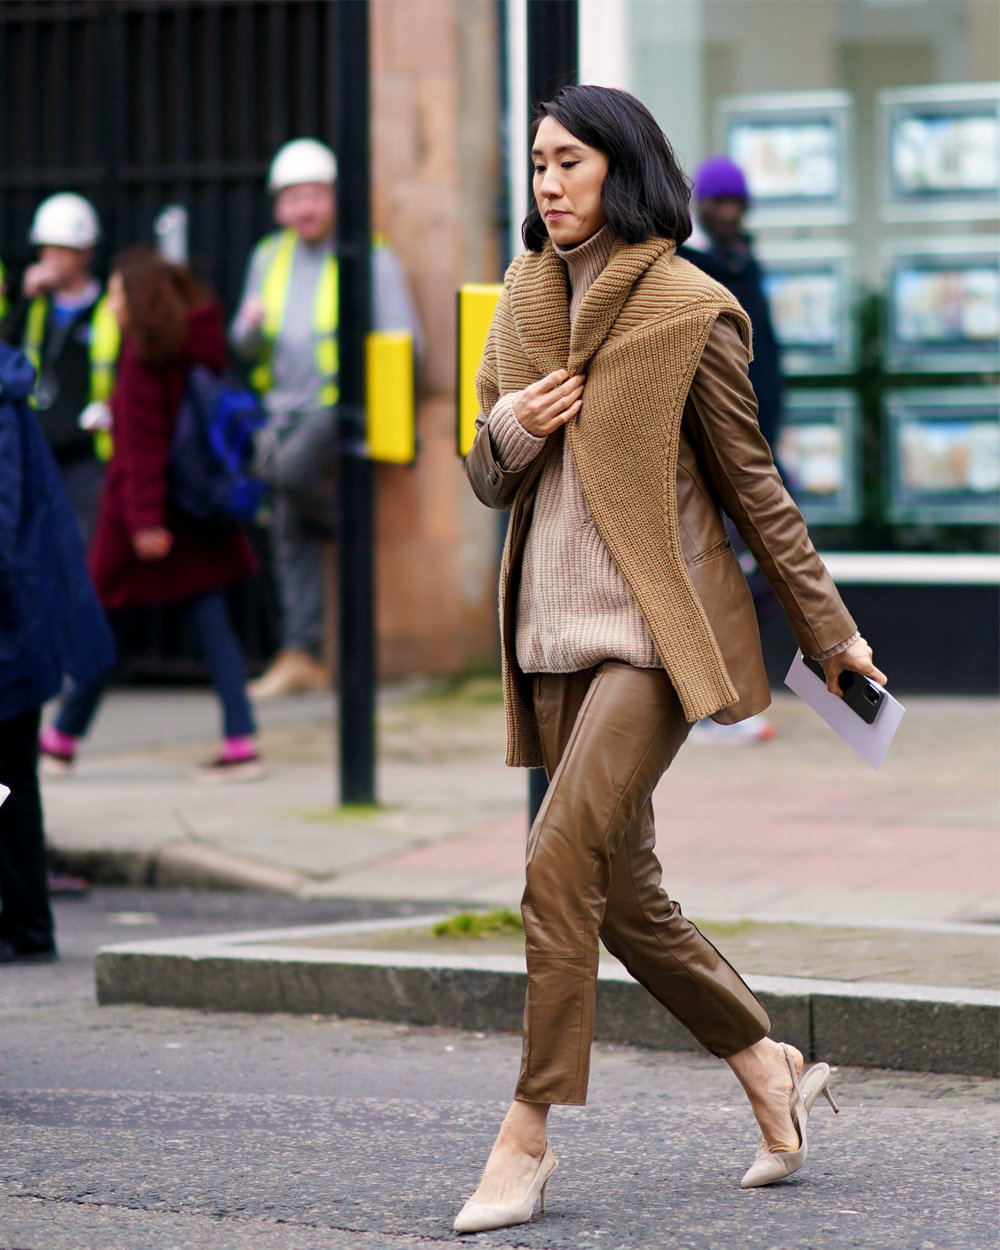 Eva Chen wears a Petra Petrovo leather suit and Manolo Blahnik heels during London Fashion Week 2020.